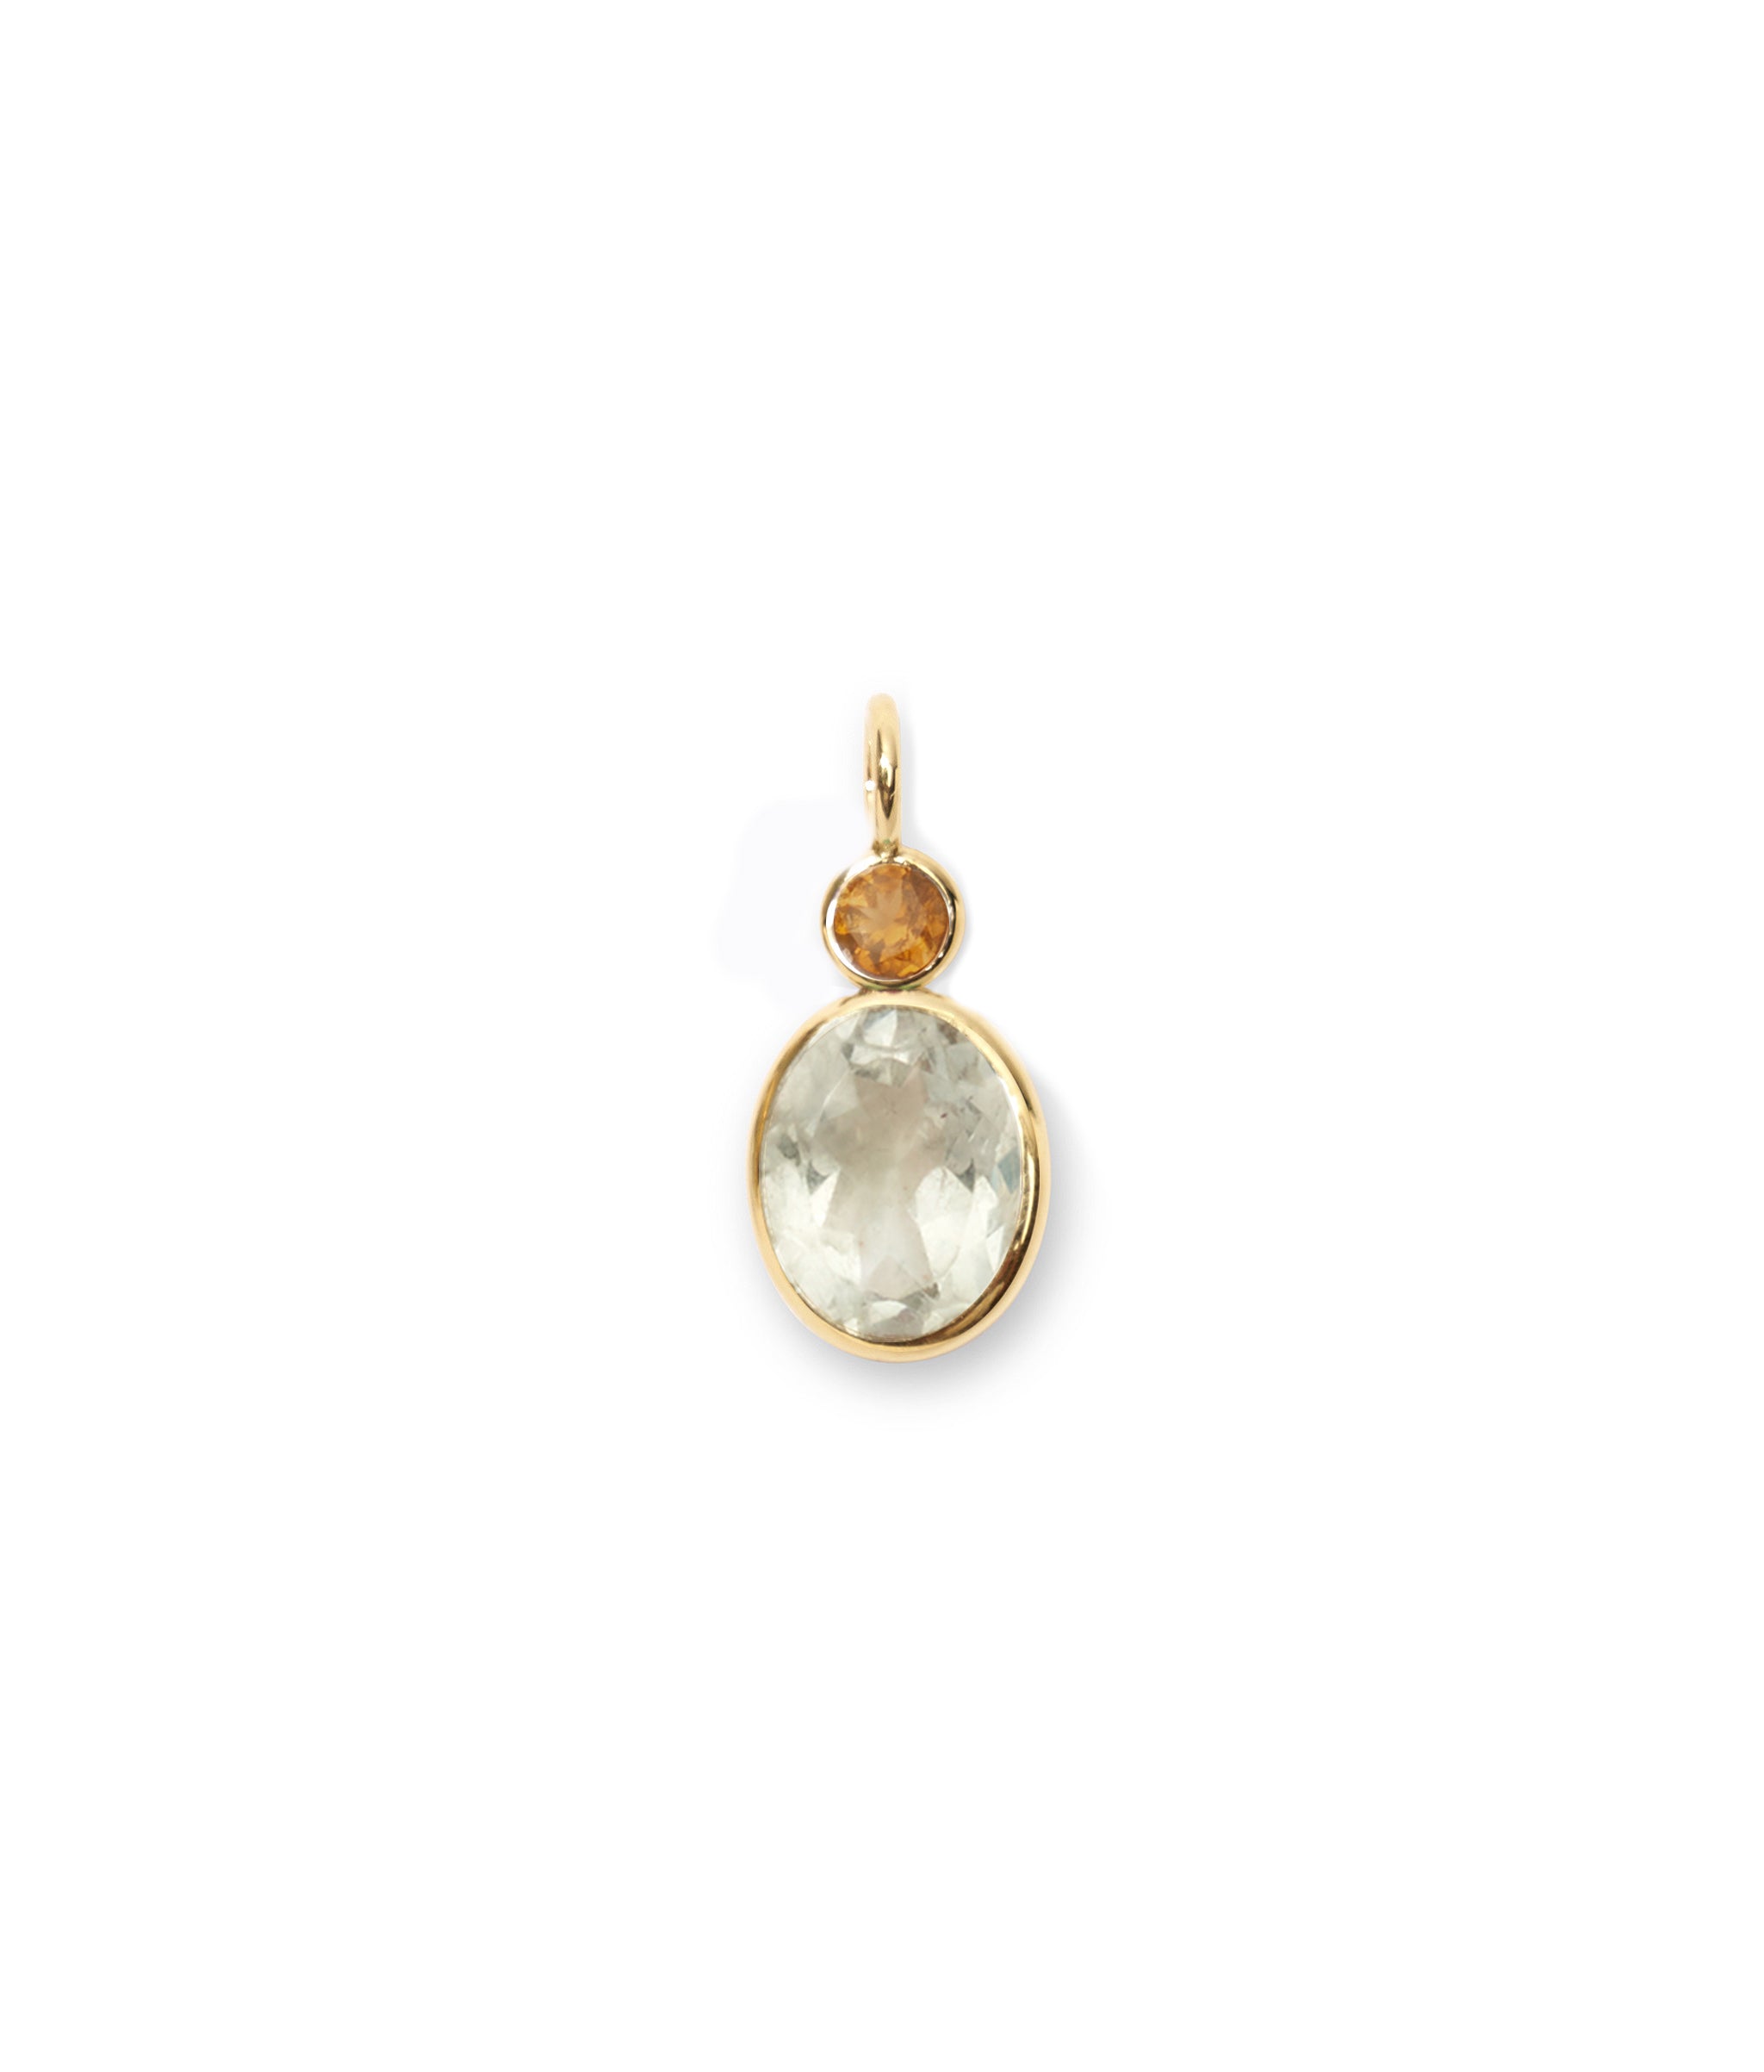 Citrine & Green Amethyst 14k Gold Necklace Charm. Faceted round citrine and green amethyst oval charm with gold bezels